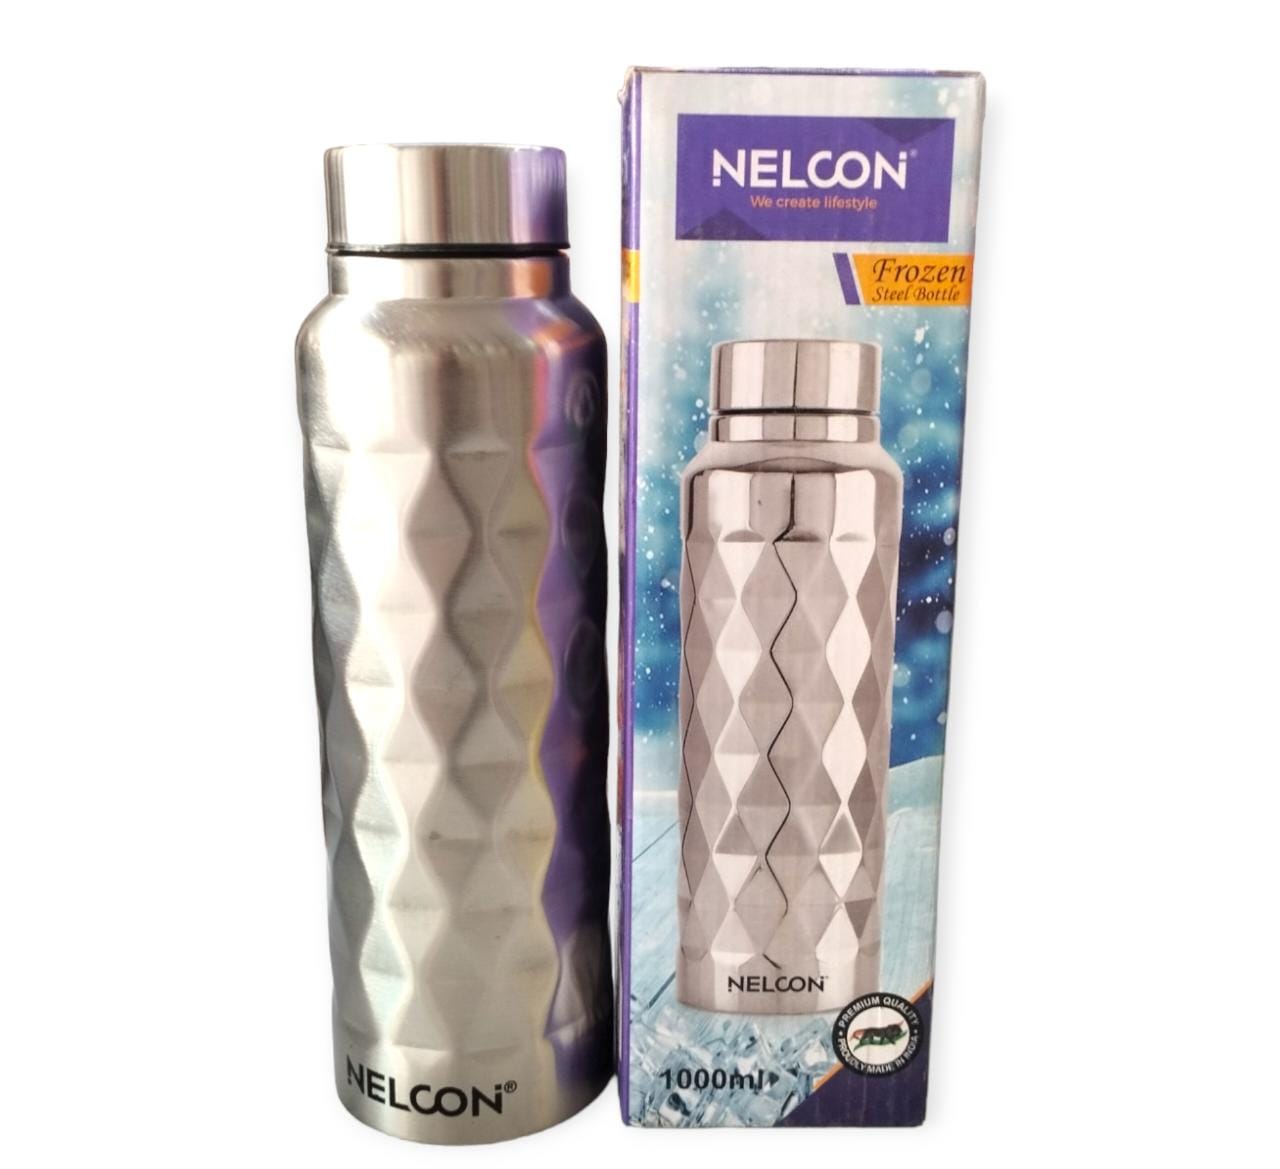 Nelcon we create lifestyle with steel bottle 